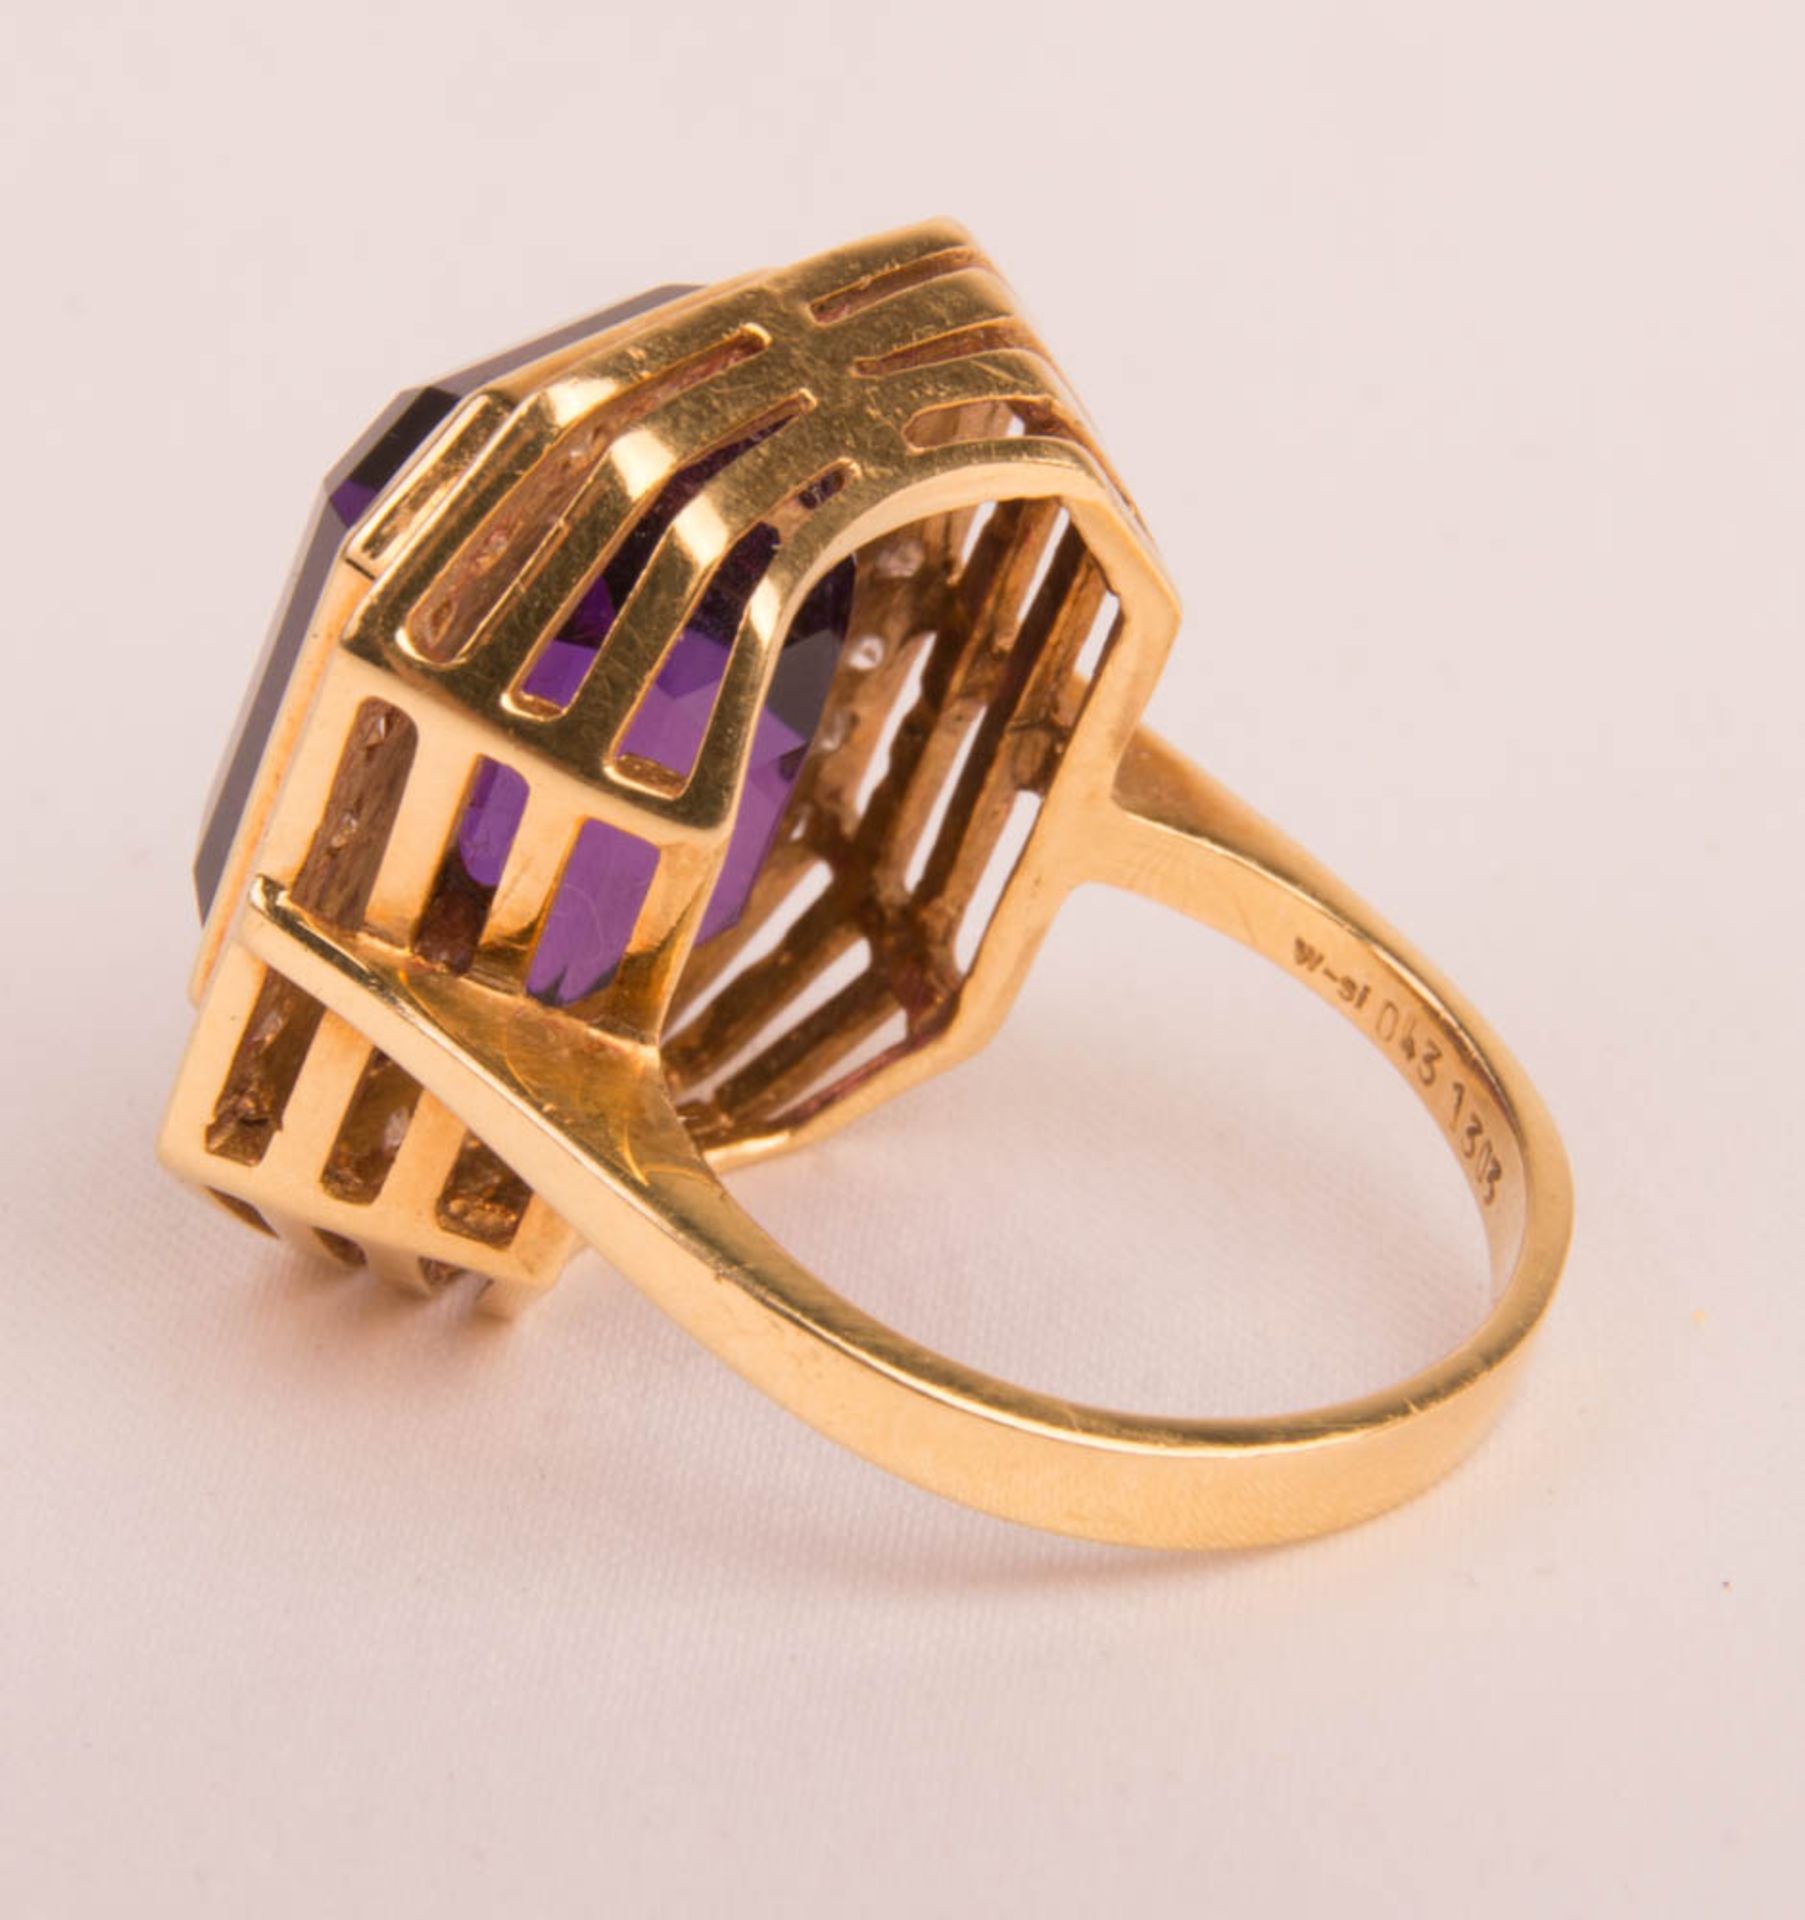 Ring with amethyst and diamonds, 750 yellow gold. - Image 3 of 6